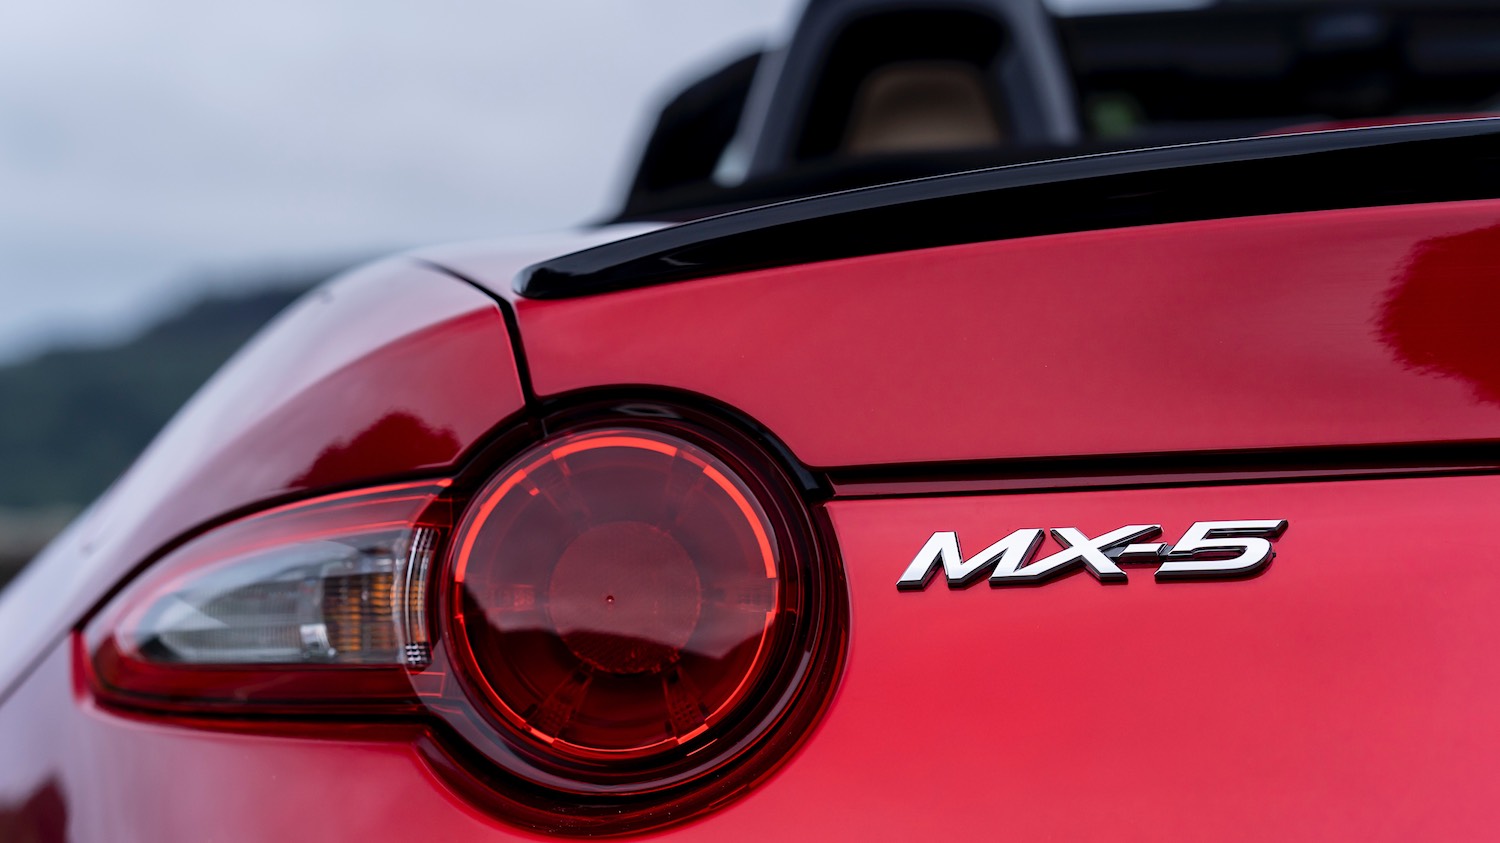 drive-Maggie Barry drives the New 2019 Mazda MX-5 at the lanch event in Ireland 8